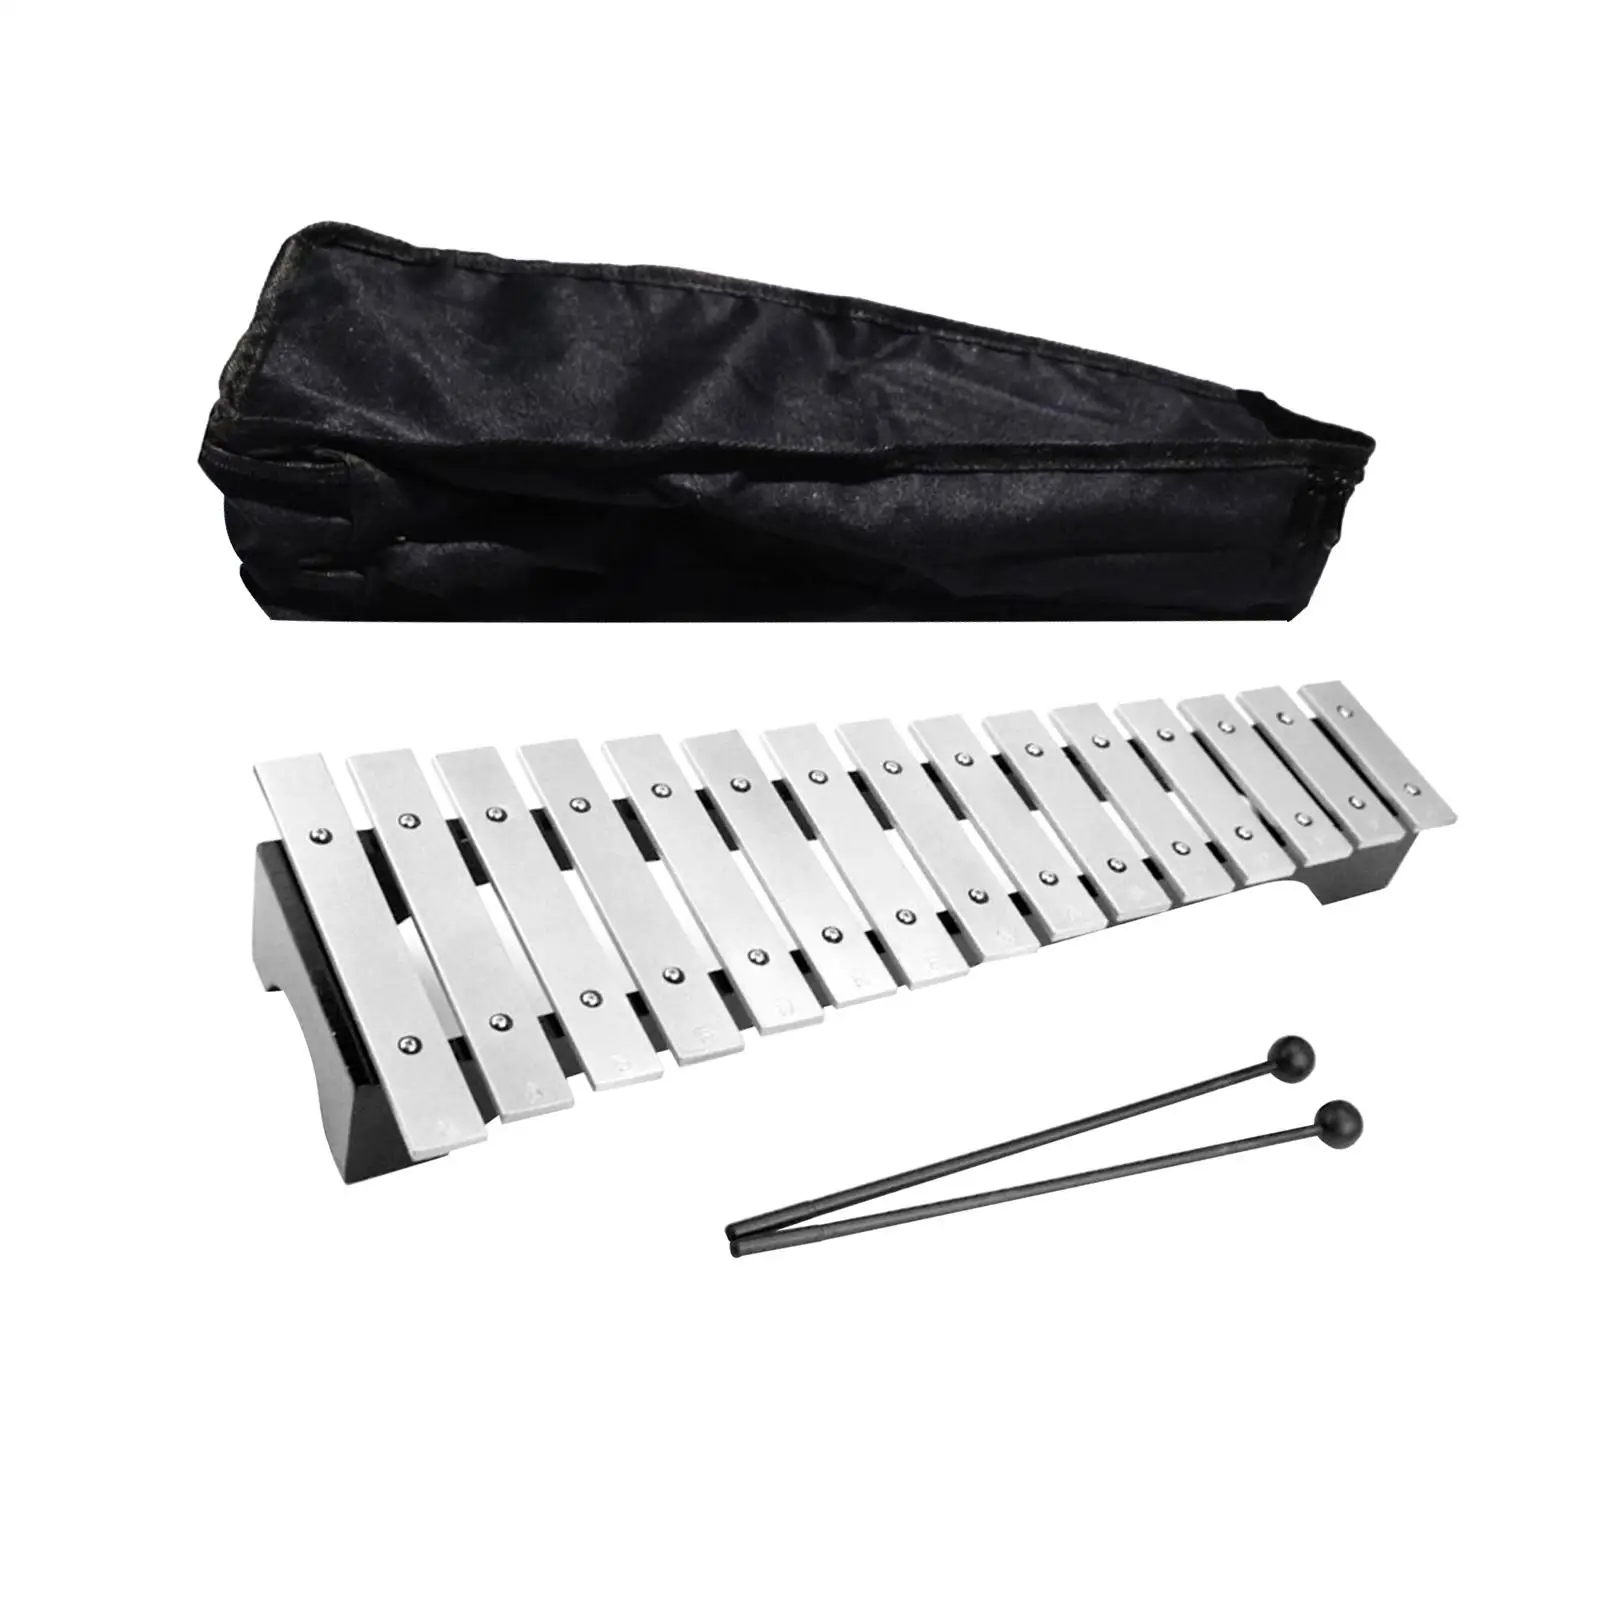 15 Note Metal Xylophone with Carrying Bag and Mallets Glockenspiel Xylophone Portable for Birthday Gift Kids Beginner Stage Band